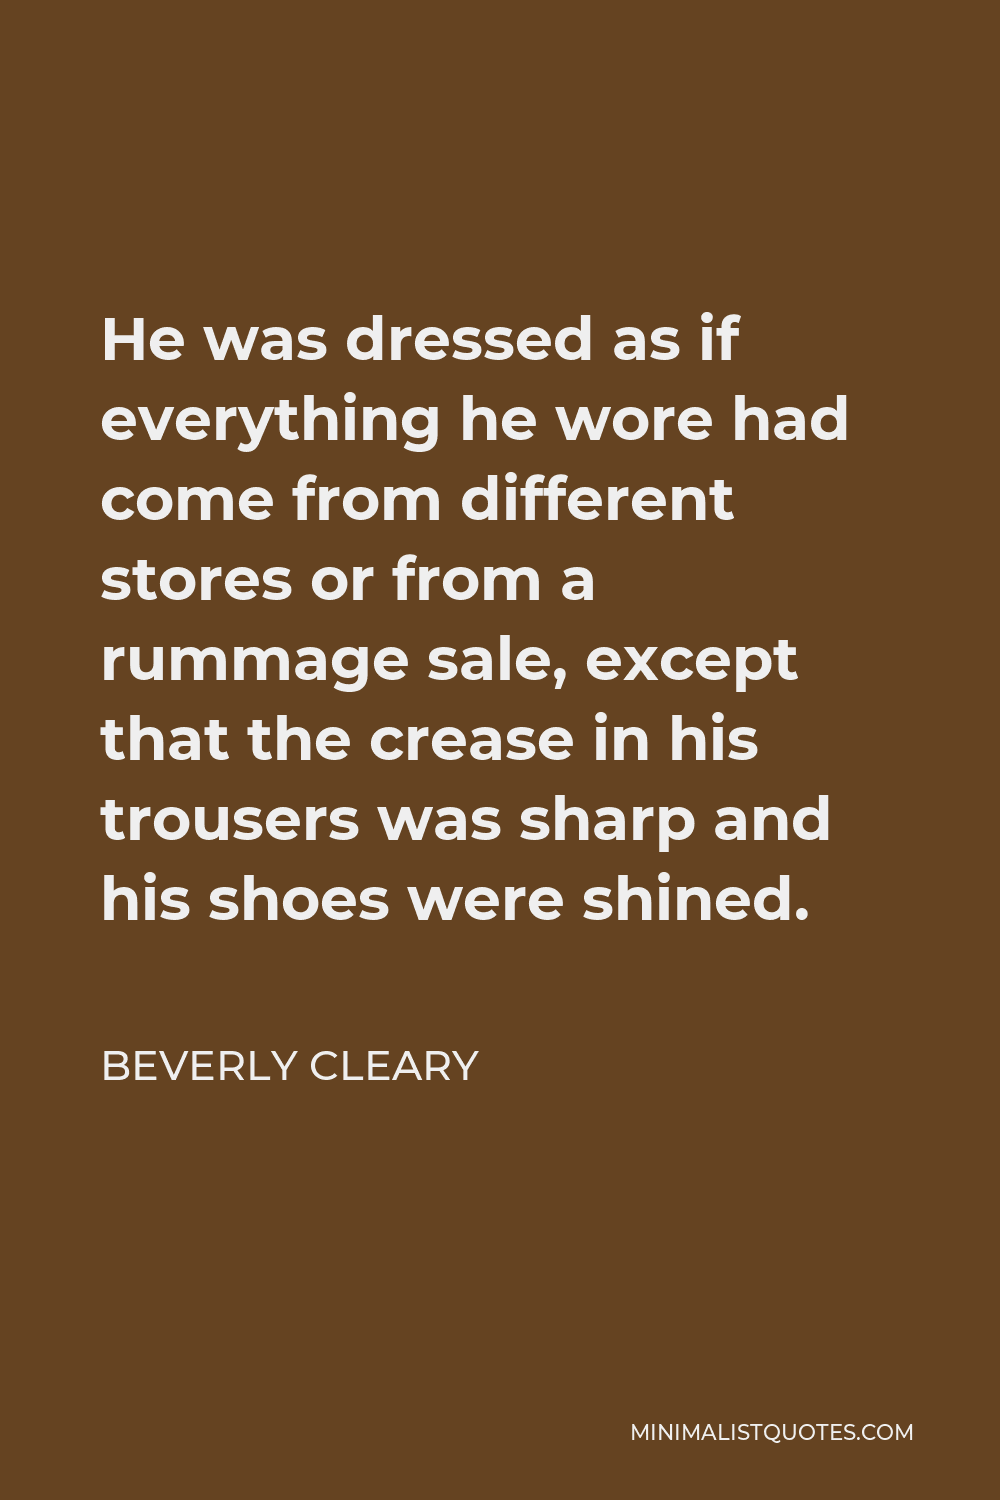 Beverly Cleary Quote - He was dressed as if everything he wore had come from different stores or from a rummage sale, except that the crease in his trousers was sharp and his shoes were shined.